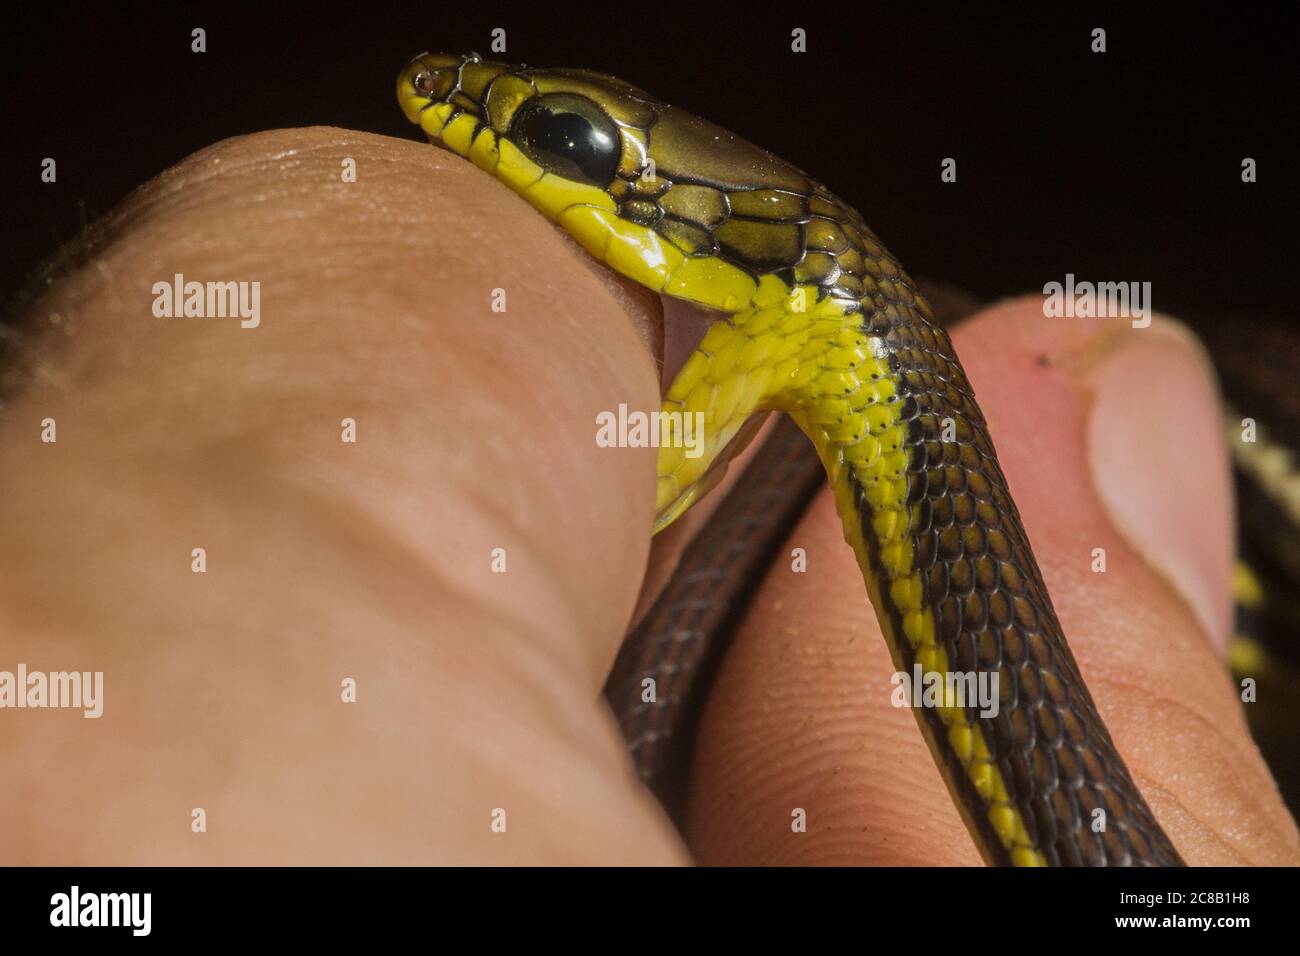 A small bronzeback tree snake (Dendrelaphis) defending itself and biting the hand that holds it. Stock Photo